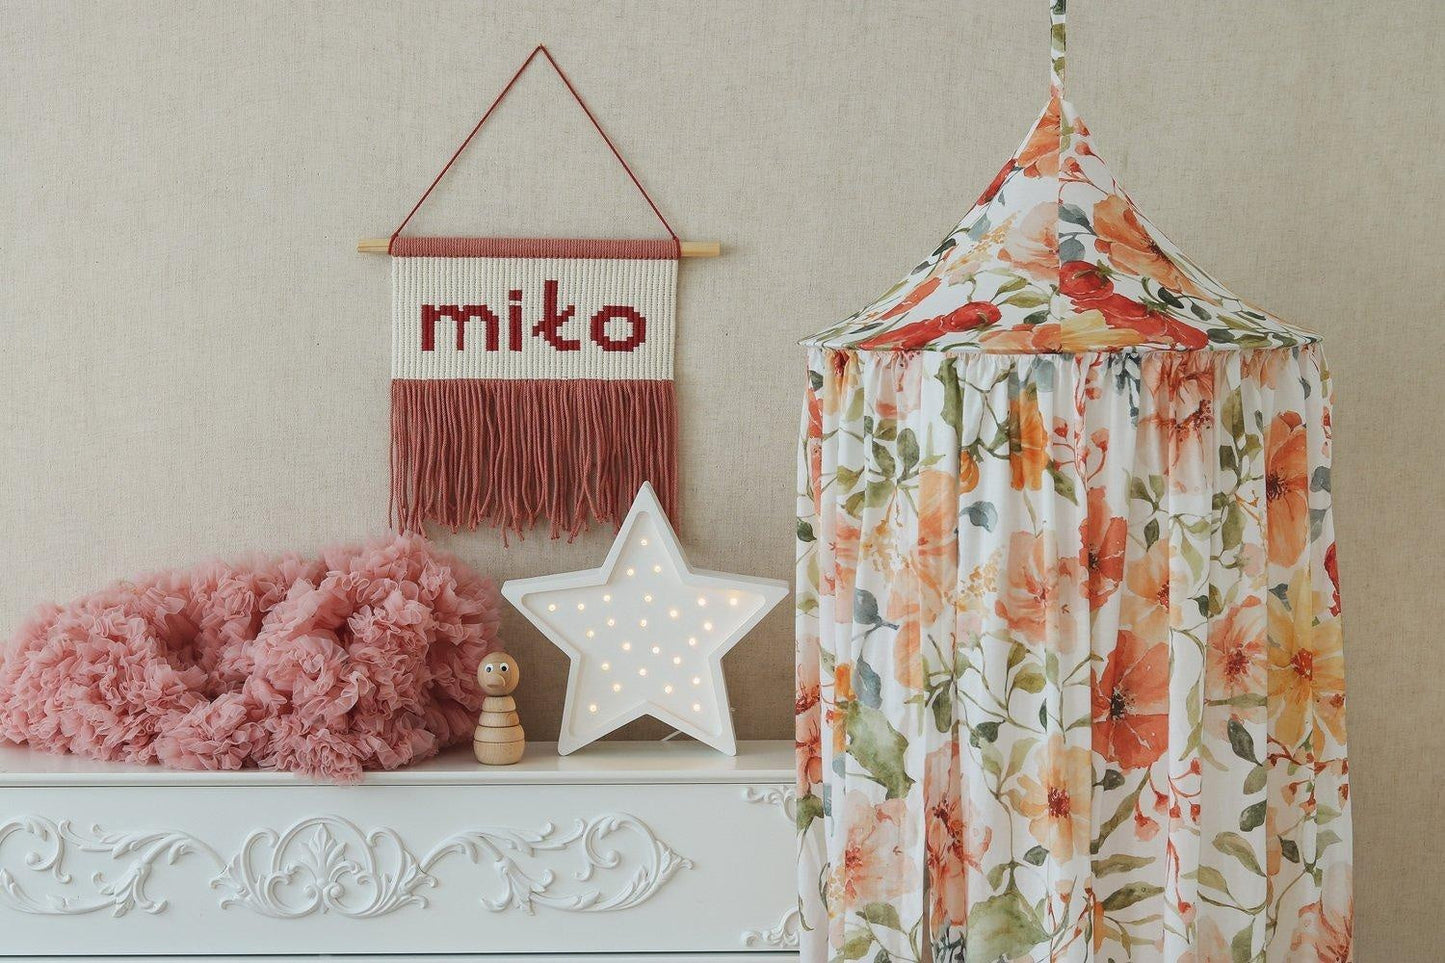 “Flower power” Canopy by Moi Mili